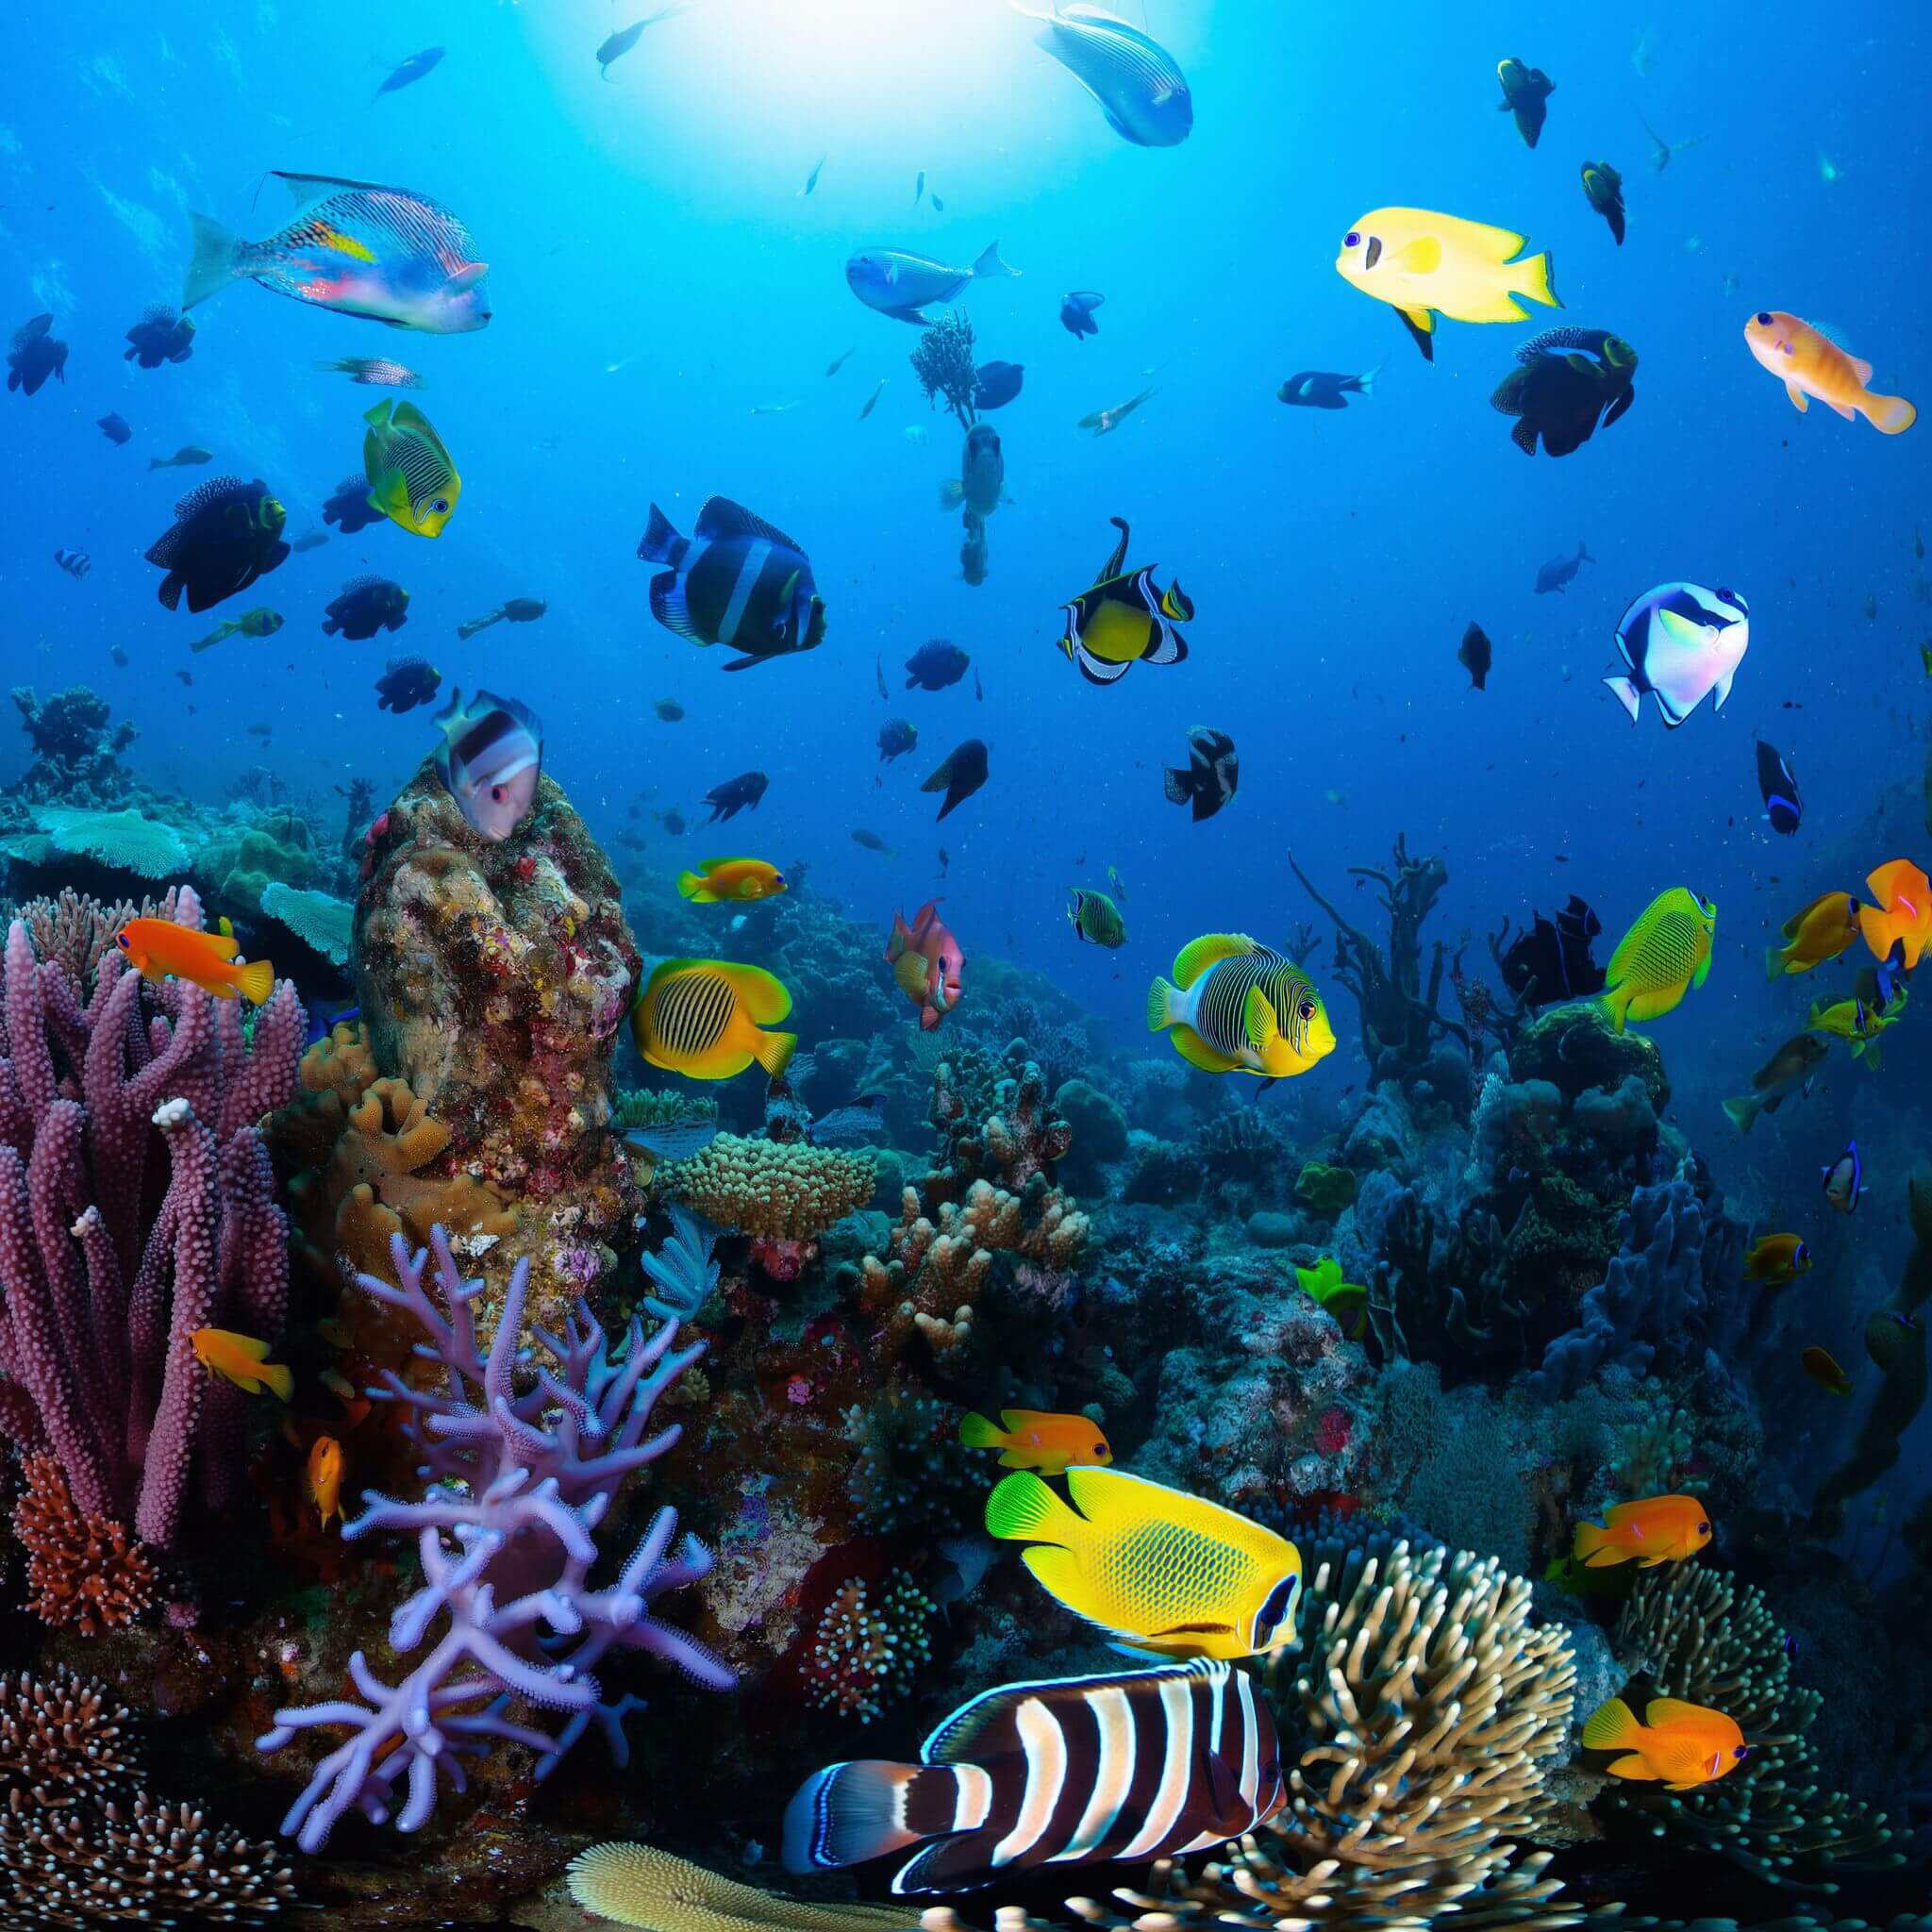 Vibrant coral reef teeming with colorful fish and sea creatures